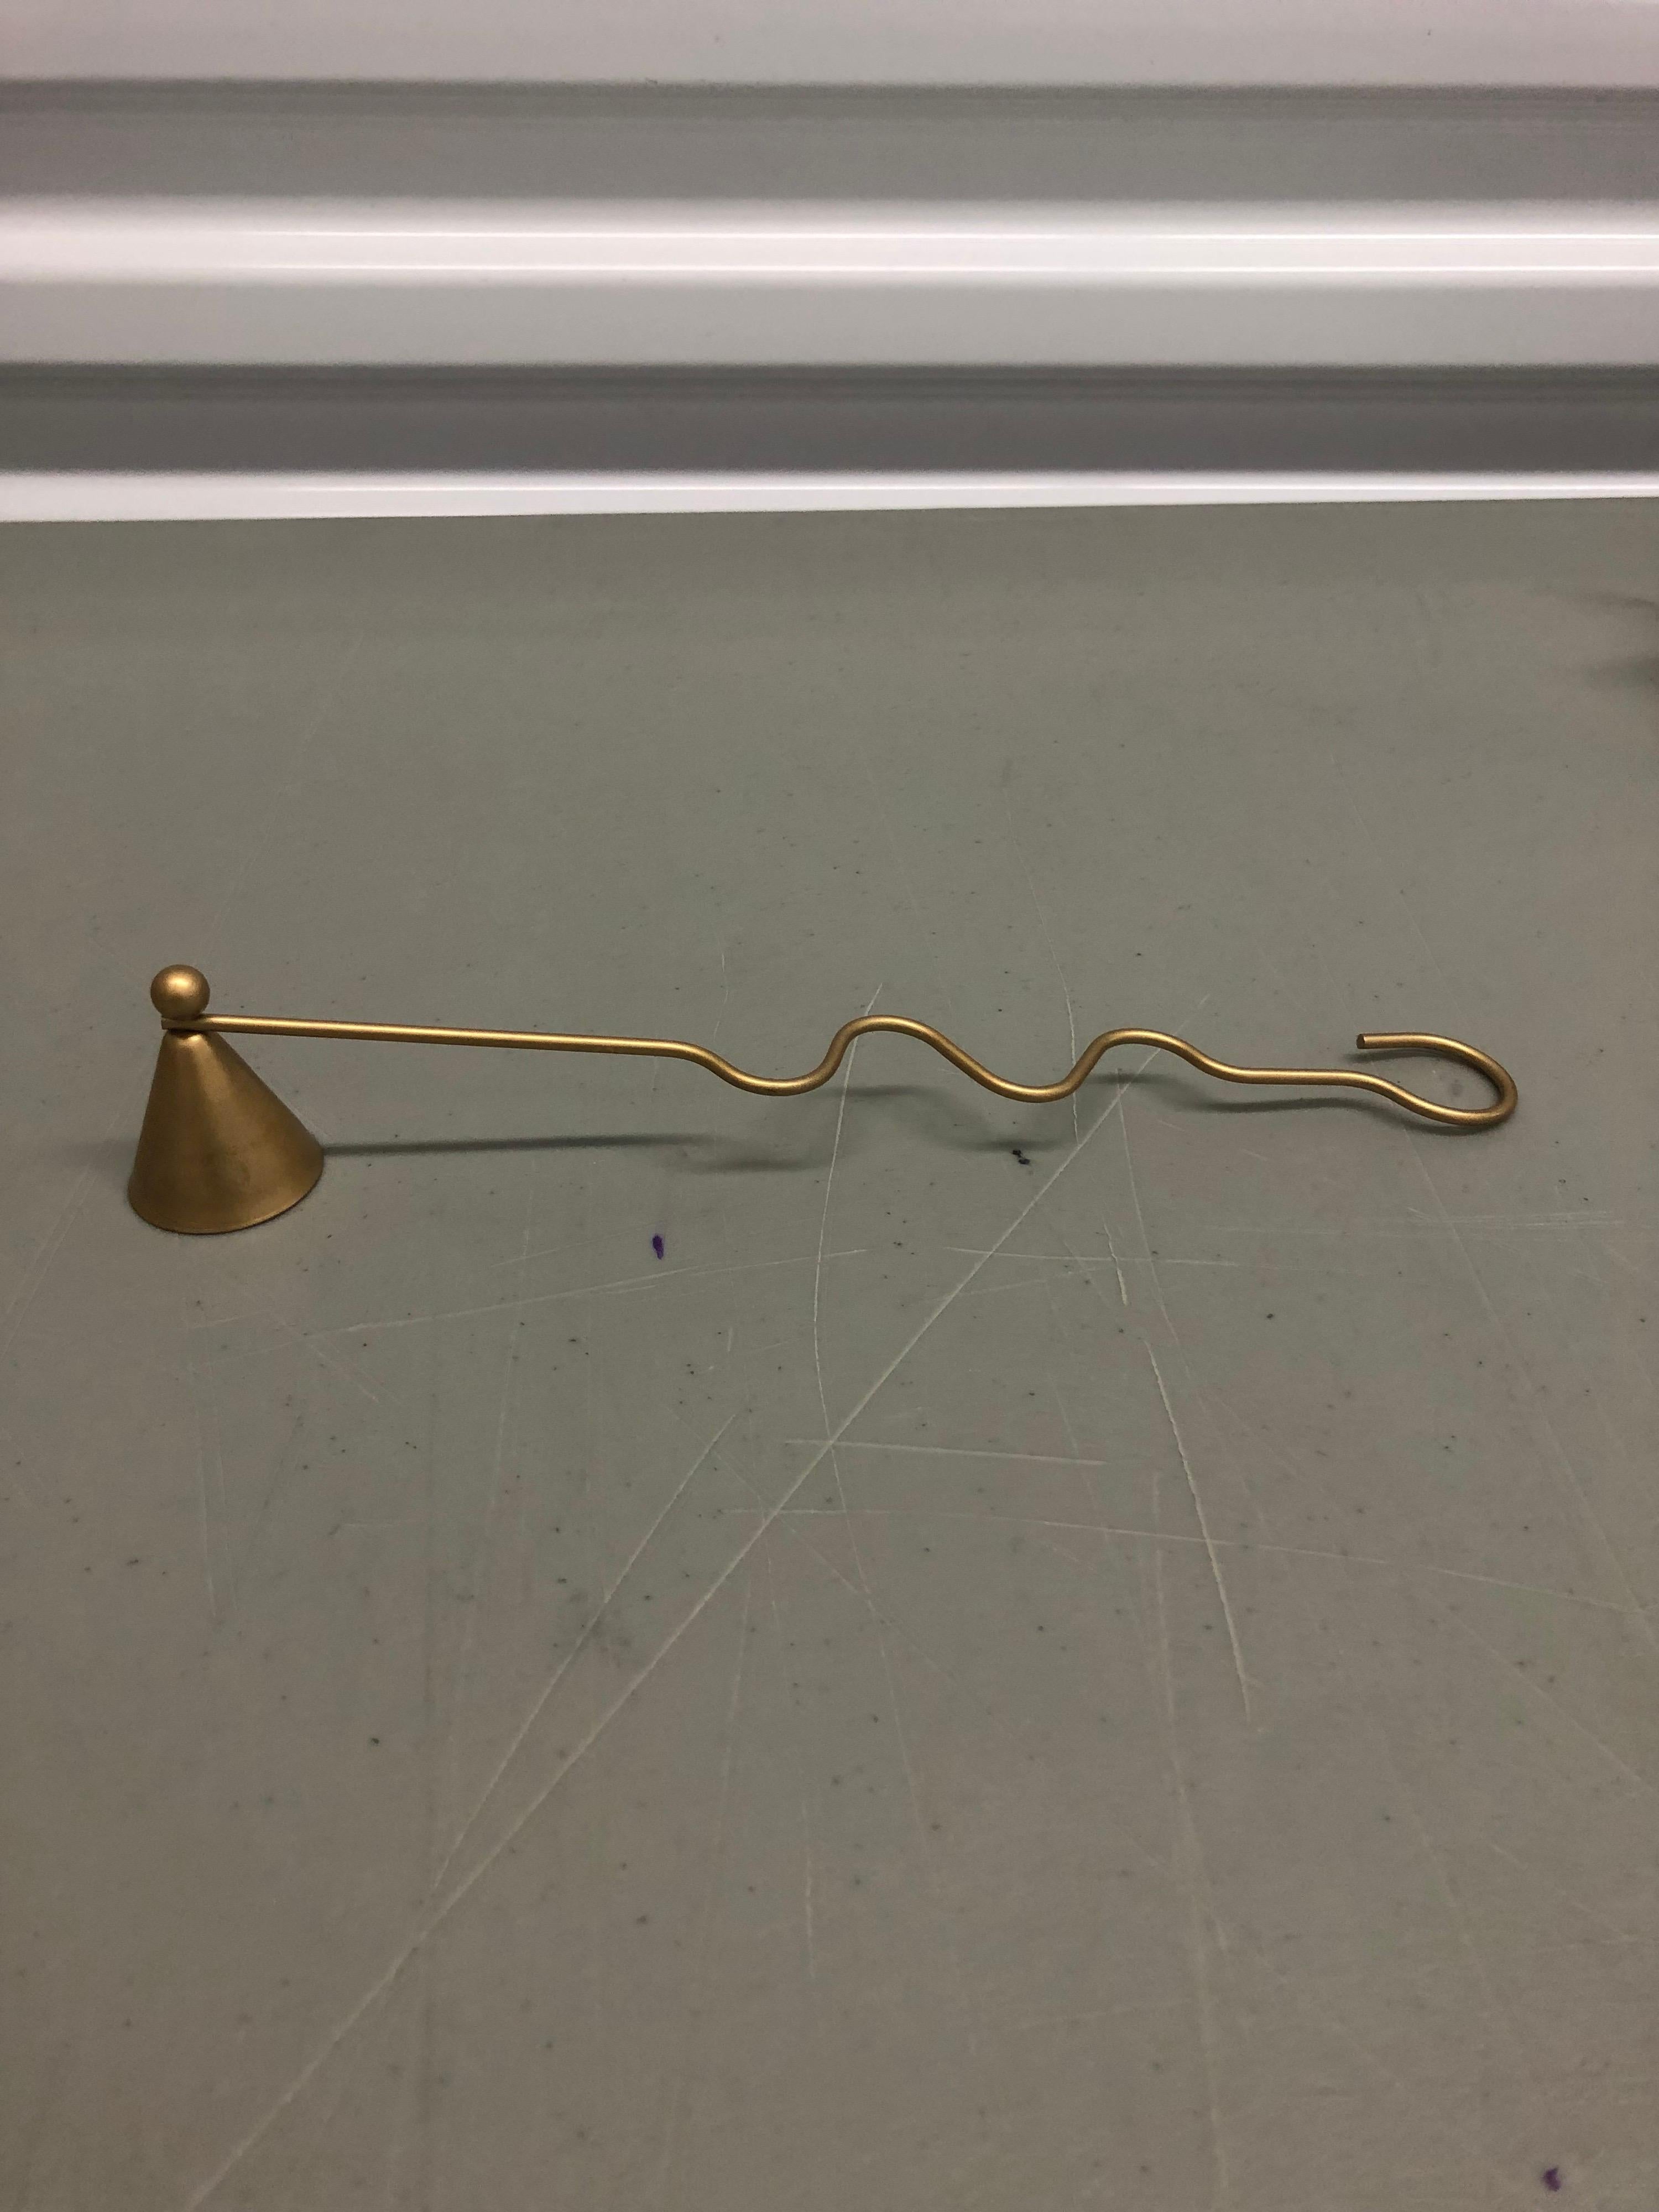 Gold modern candle snuffer with curly handle.
Size: 10.5” L x 1.1/4” D x 1.75” H.